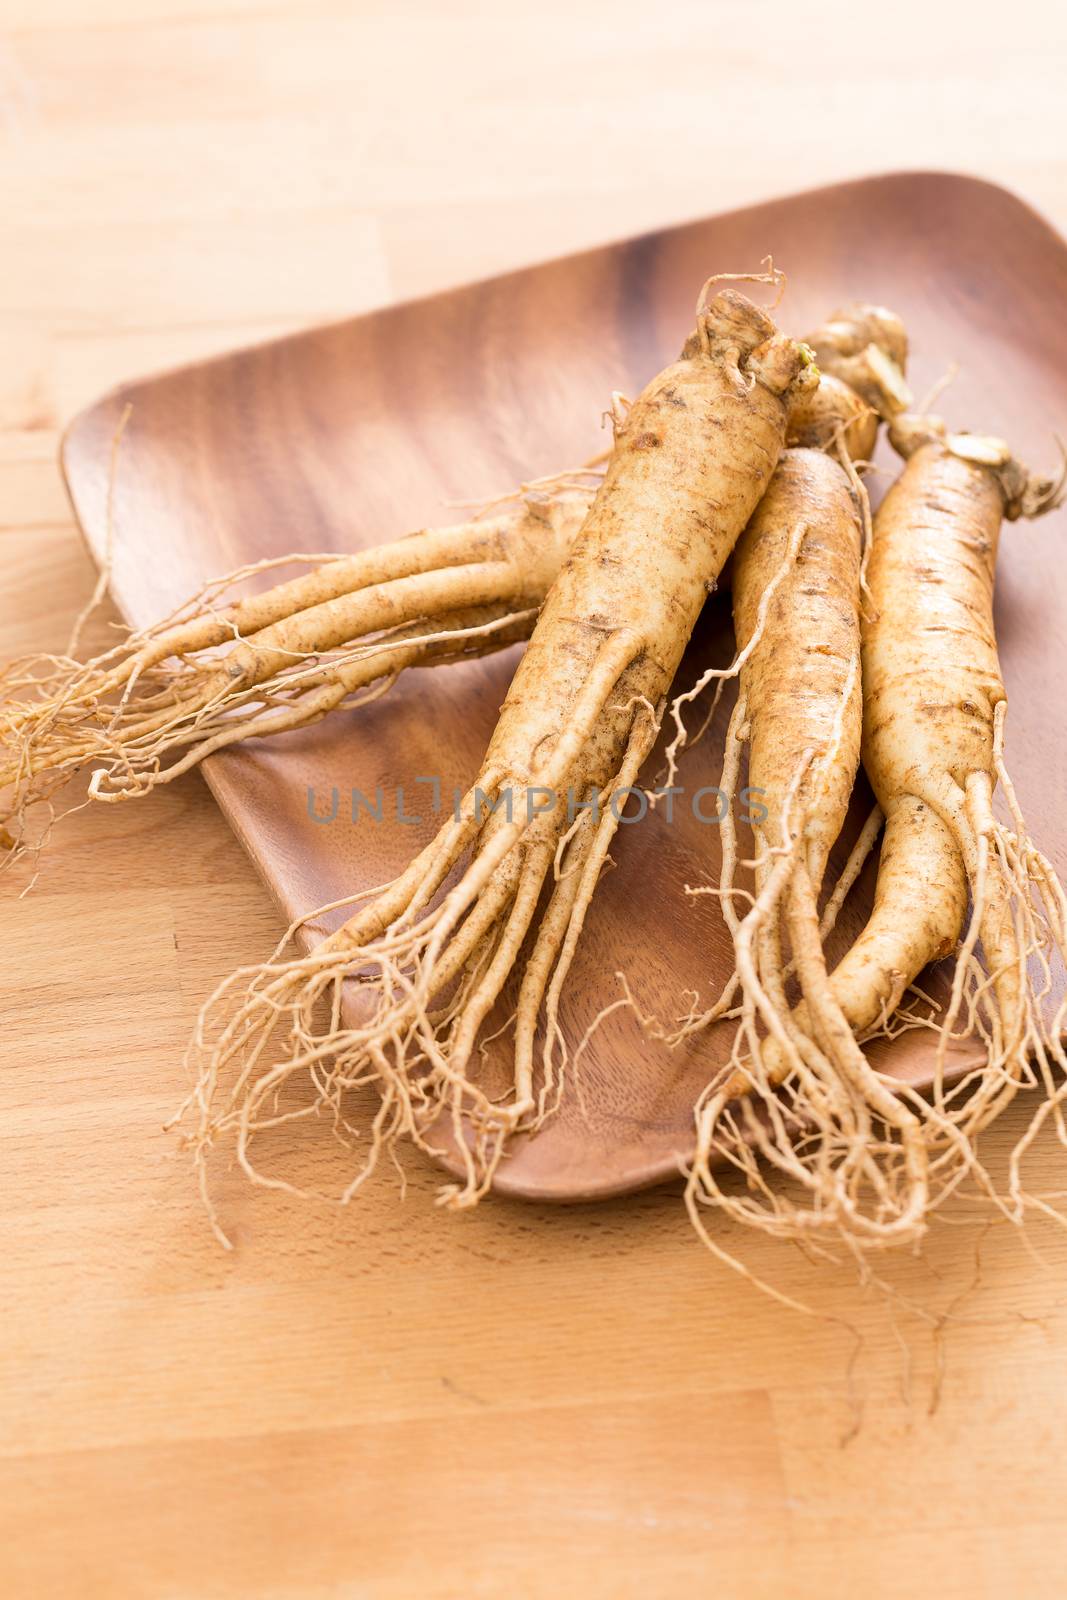 Ginseng over wooden background